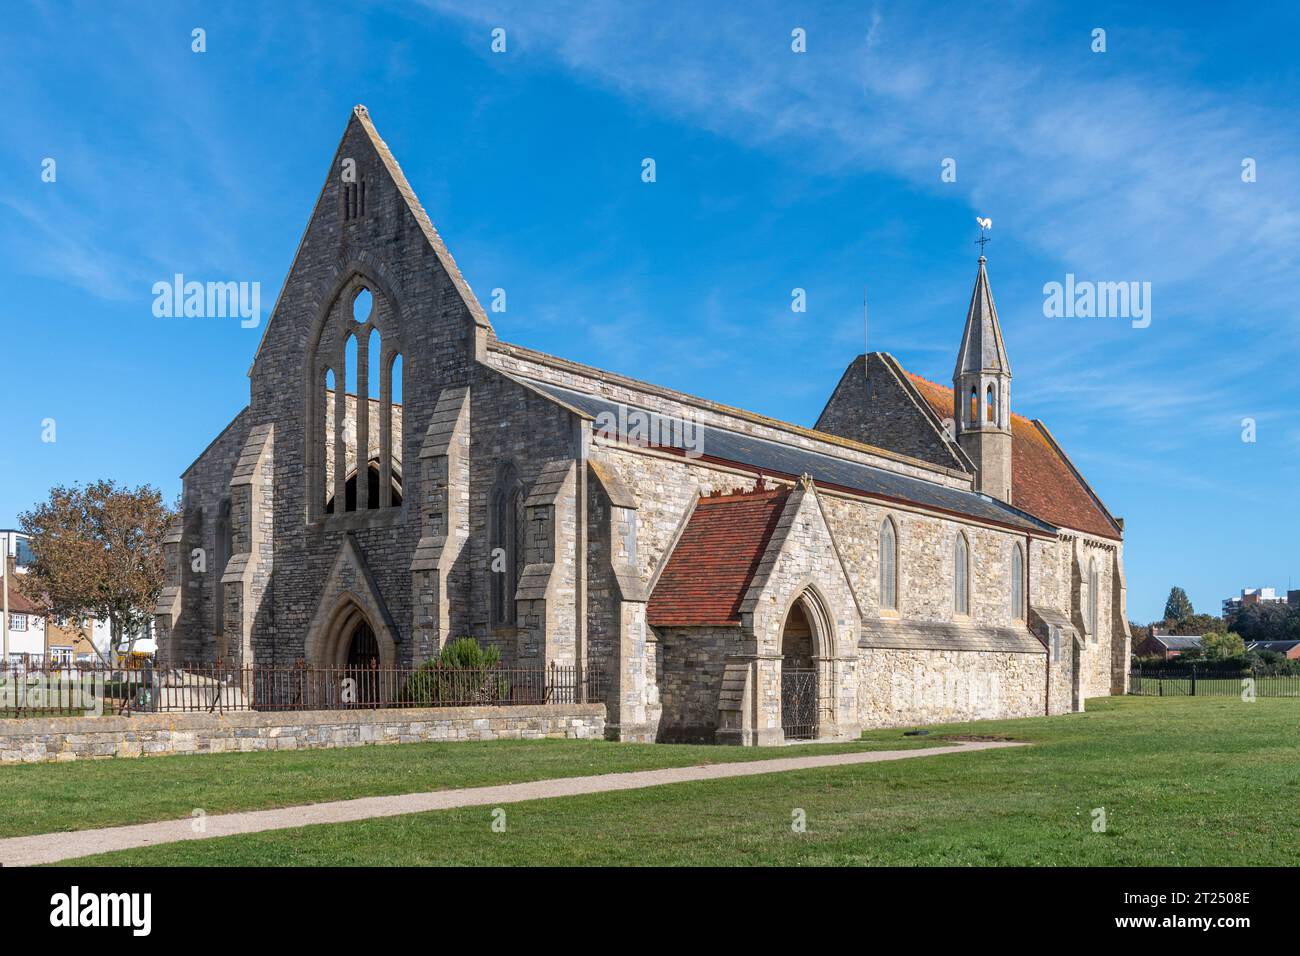 Royal Garrison Church, also called Domus Dei, in Old Portsmouth, Hampshire, England, UK, on a sunny October day. Built in about 1212. Stock Photo